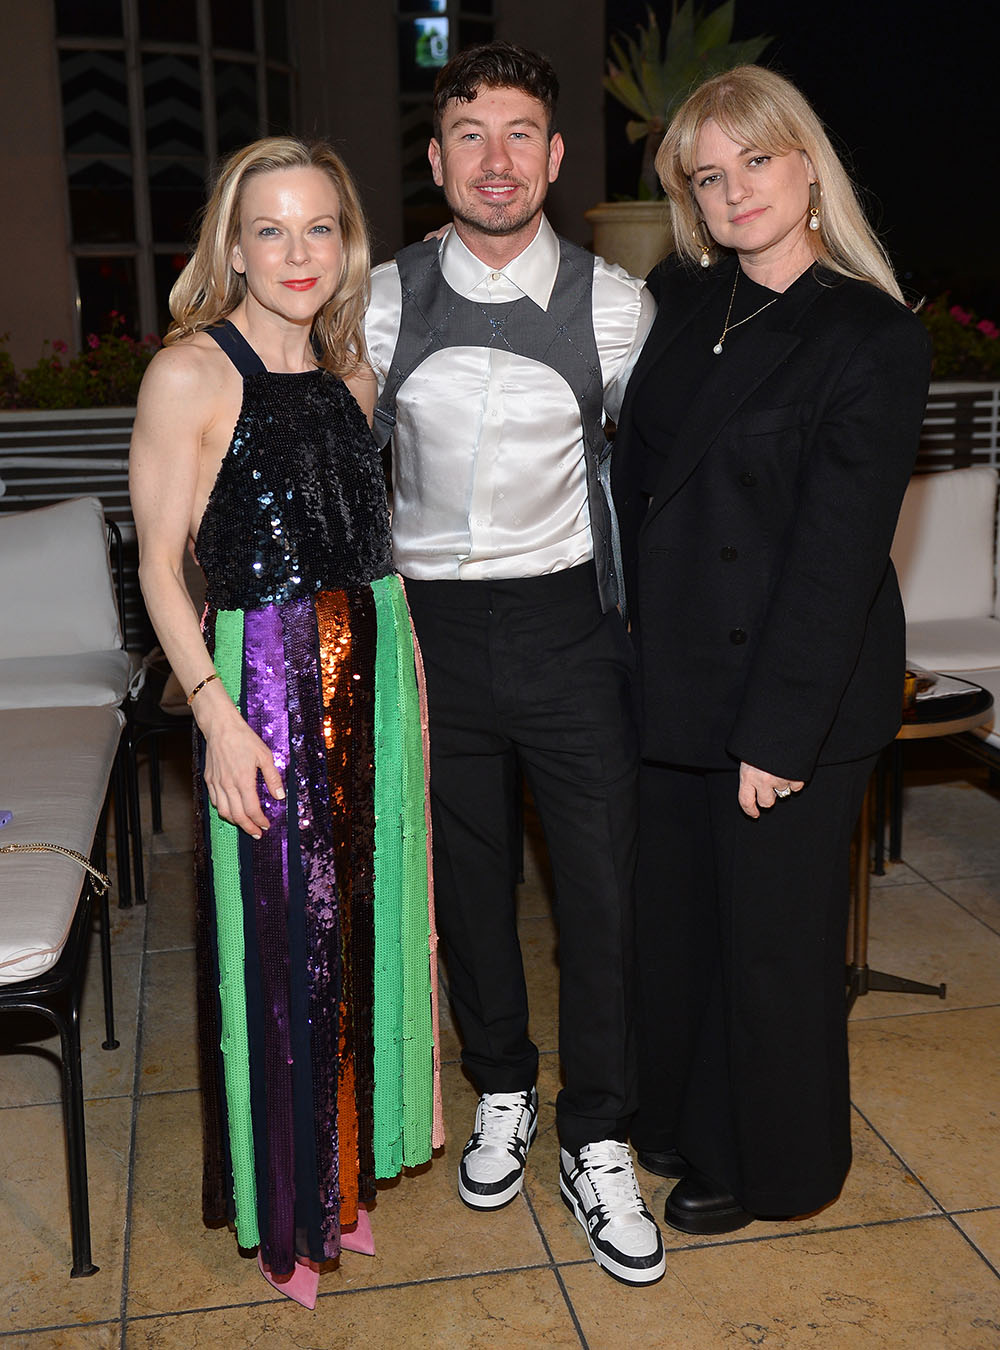 (L-R) Carol McColgin, Barry Keoghan, and Ilaria Urbinati attend The Hollywood Reporter And Jimmy Choo Power Stylists Dinner at The Terrace at Sunset Tower on March 28, 2023 in West Hollywood, California.